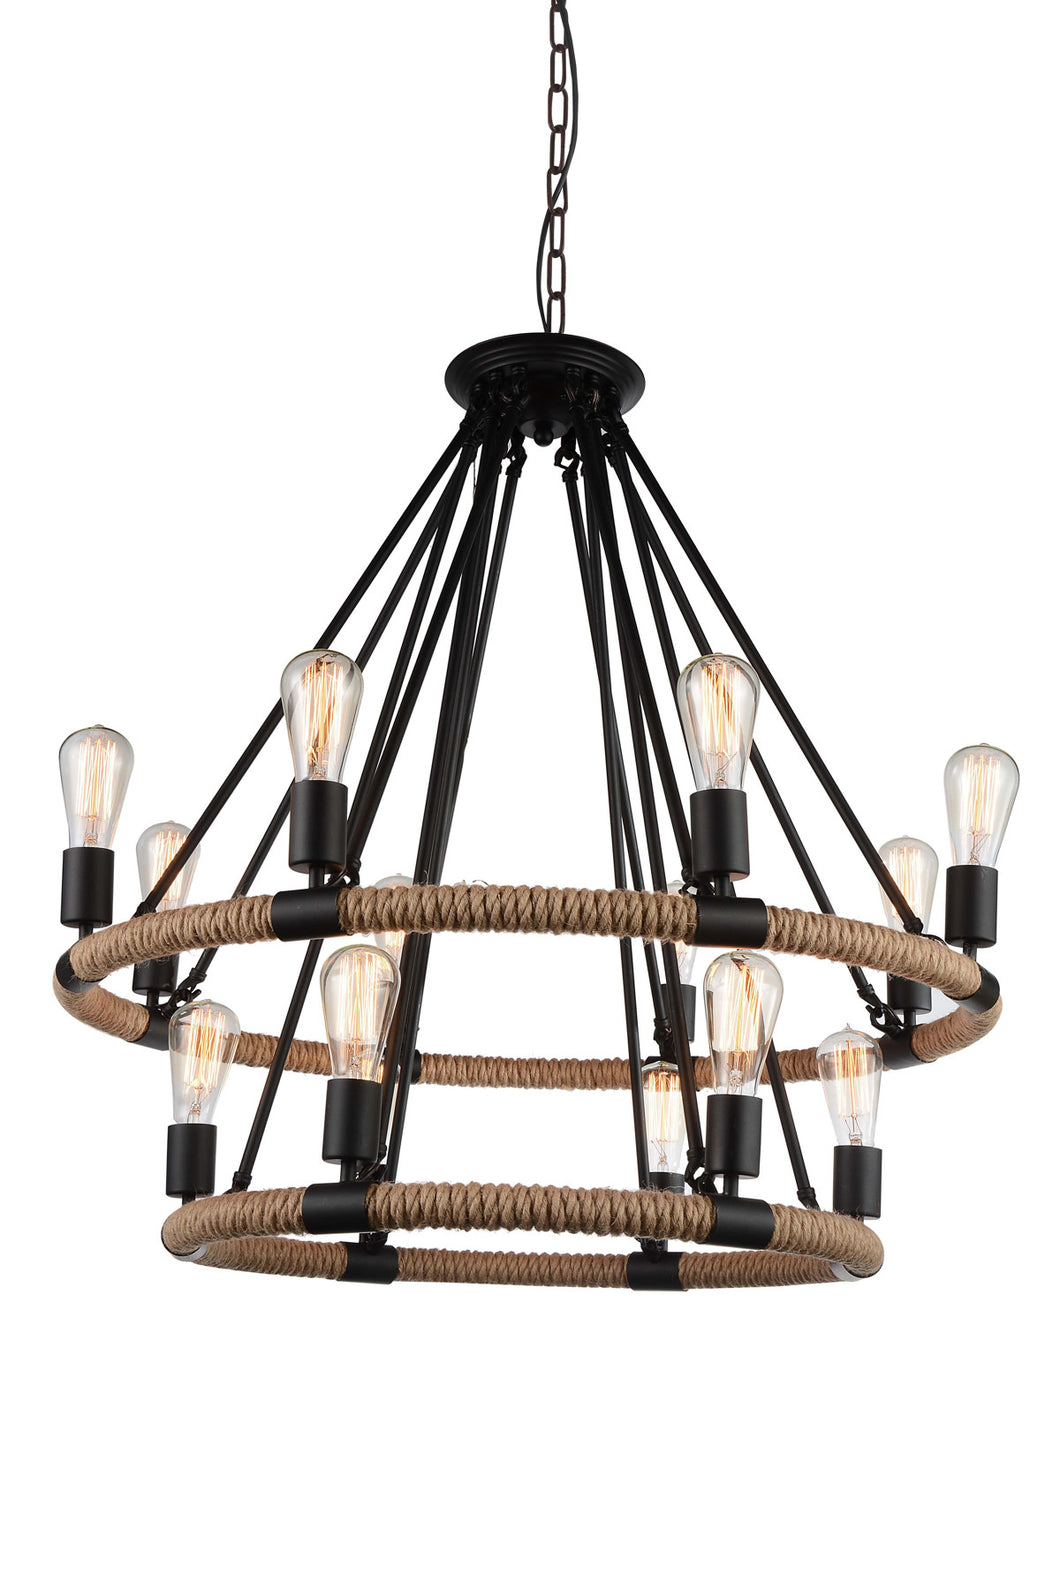 14 Light Up Chandelier with Black finish